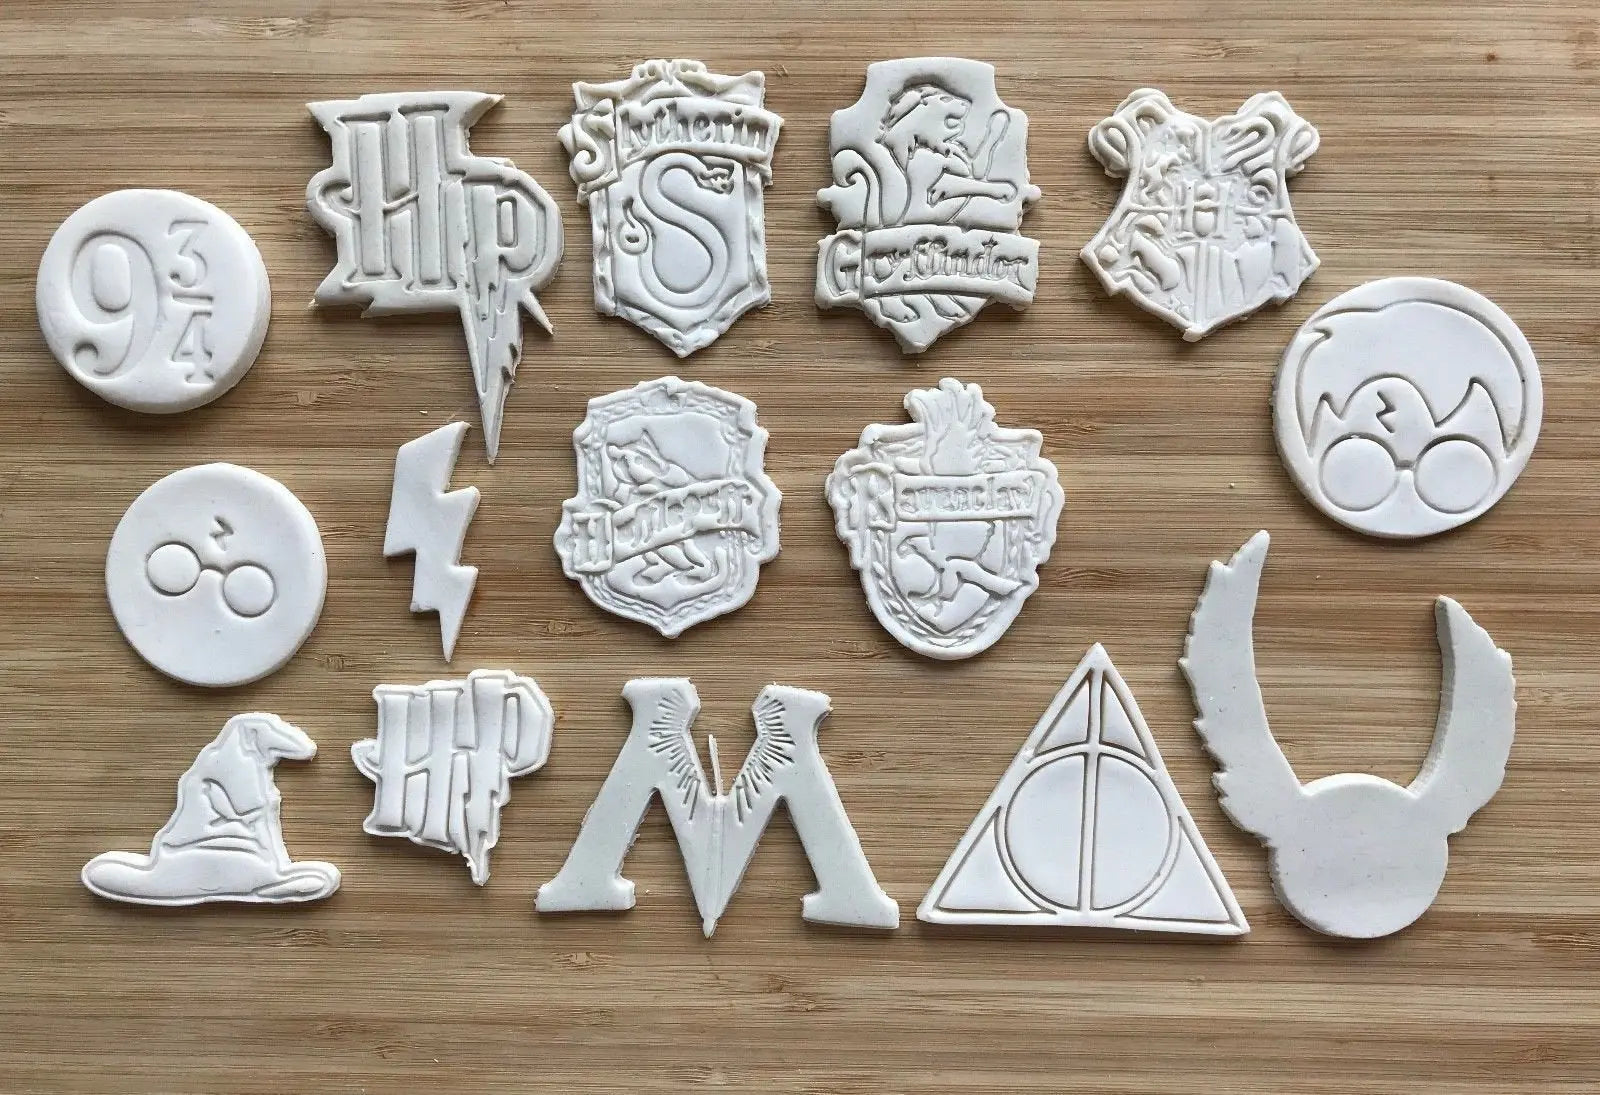 Harry Potter-Inspired Cookie cutter cake decoration – MEG cookie cutters